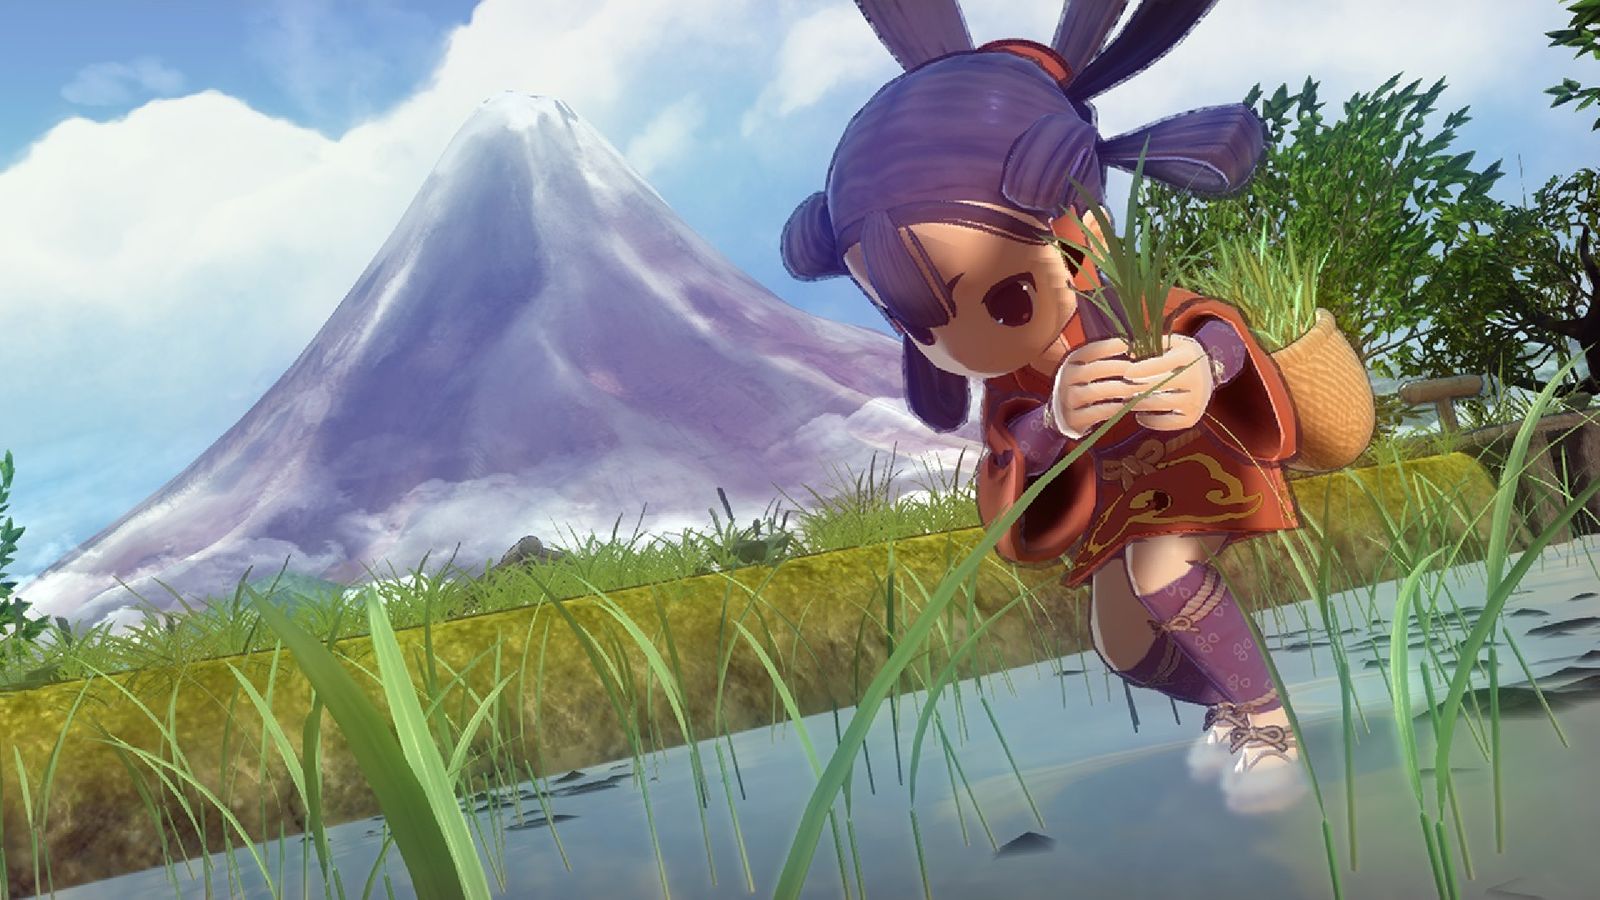 A character with purple hair wearing orange and purple clothes crouching down in water in front of a tall mountain in the background.